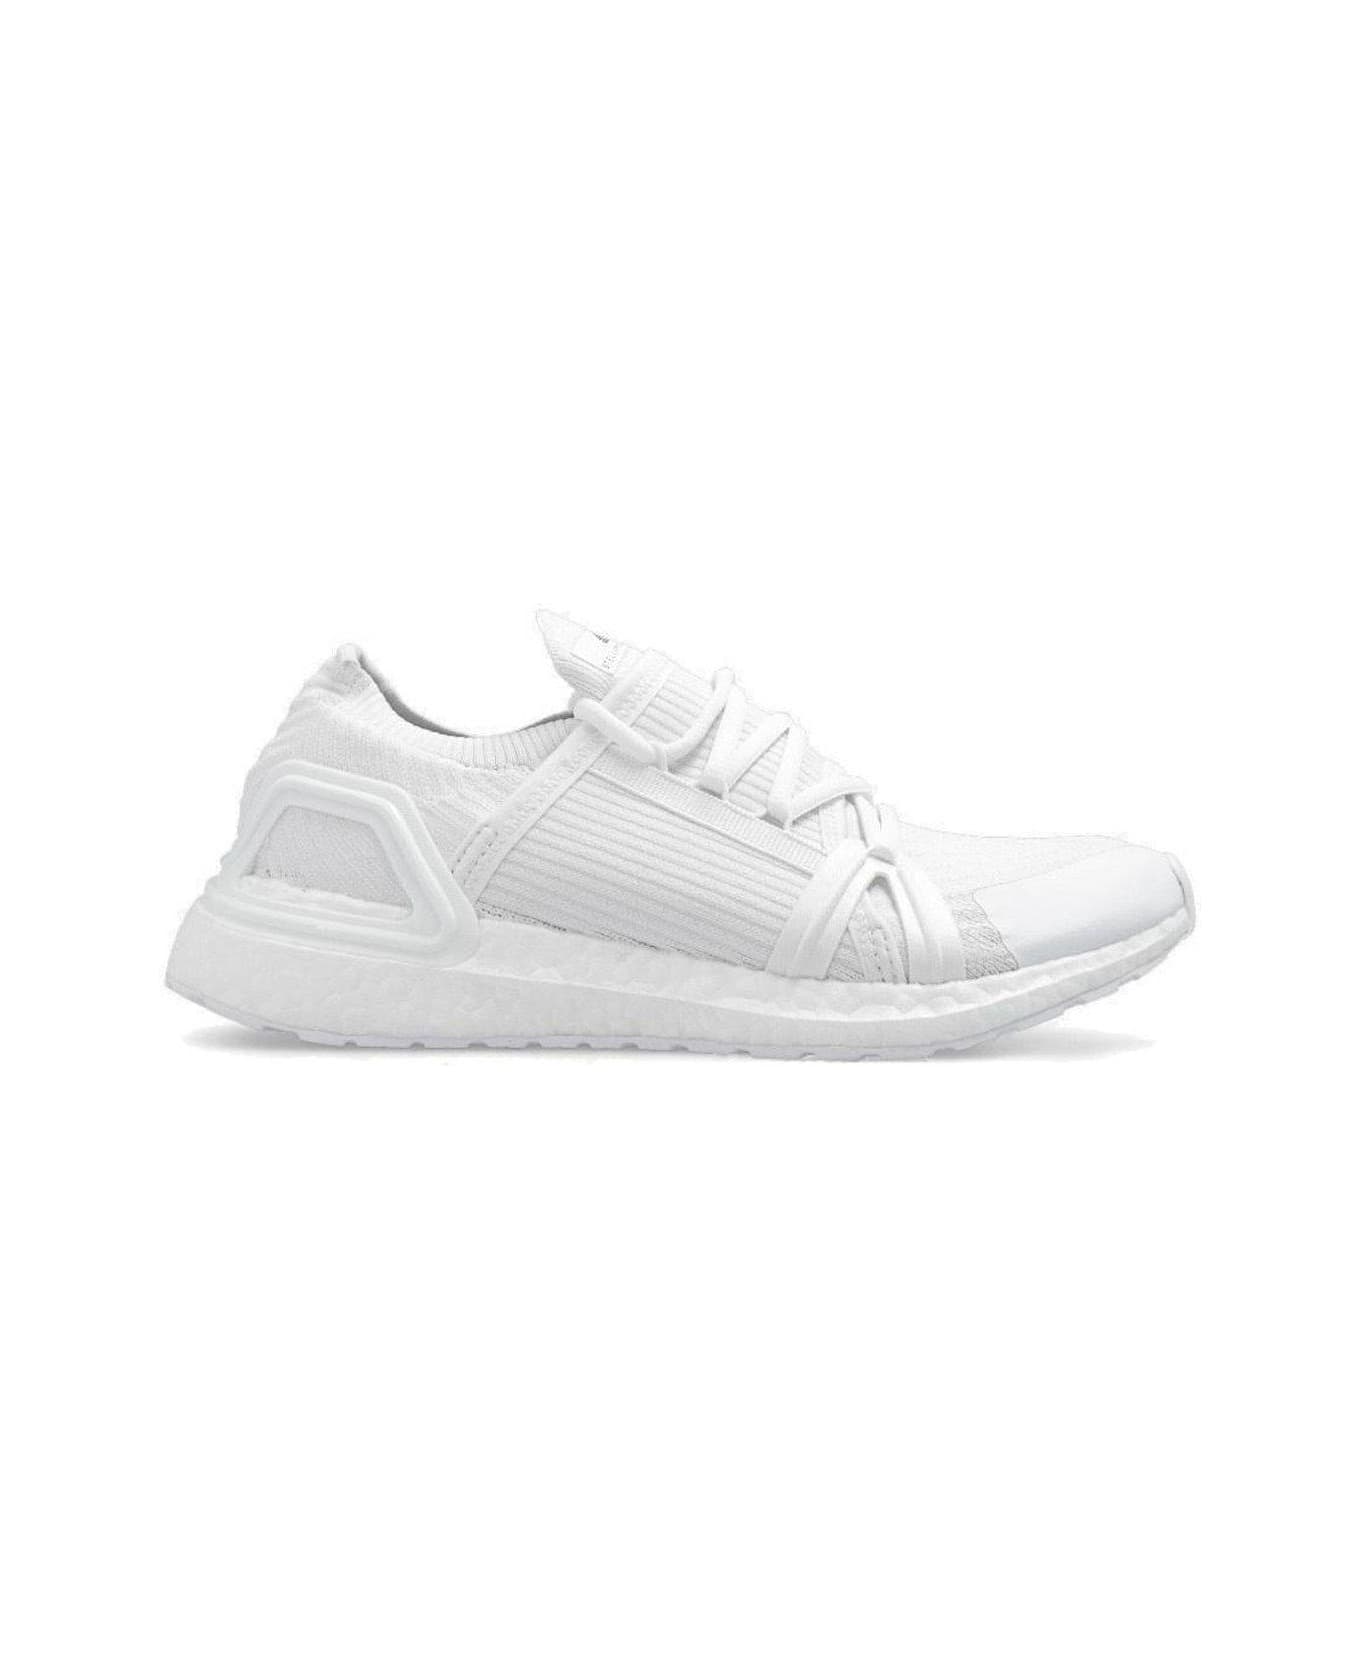 Adidas by Stella McCartney Ultraboost 20 Lace-up Sneakers - White スニーカー